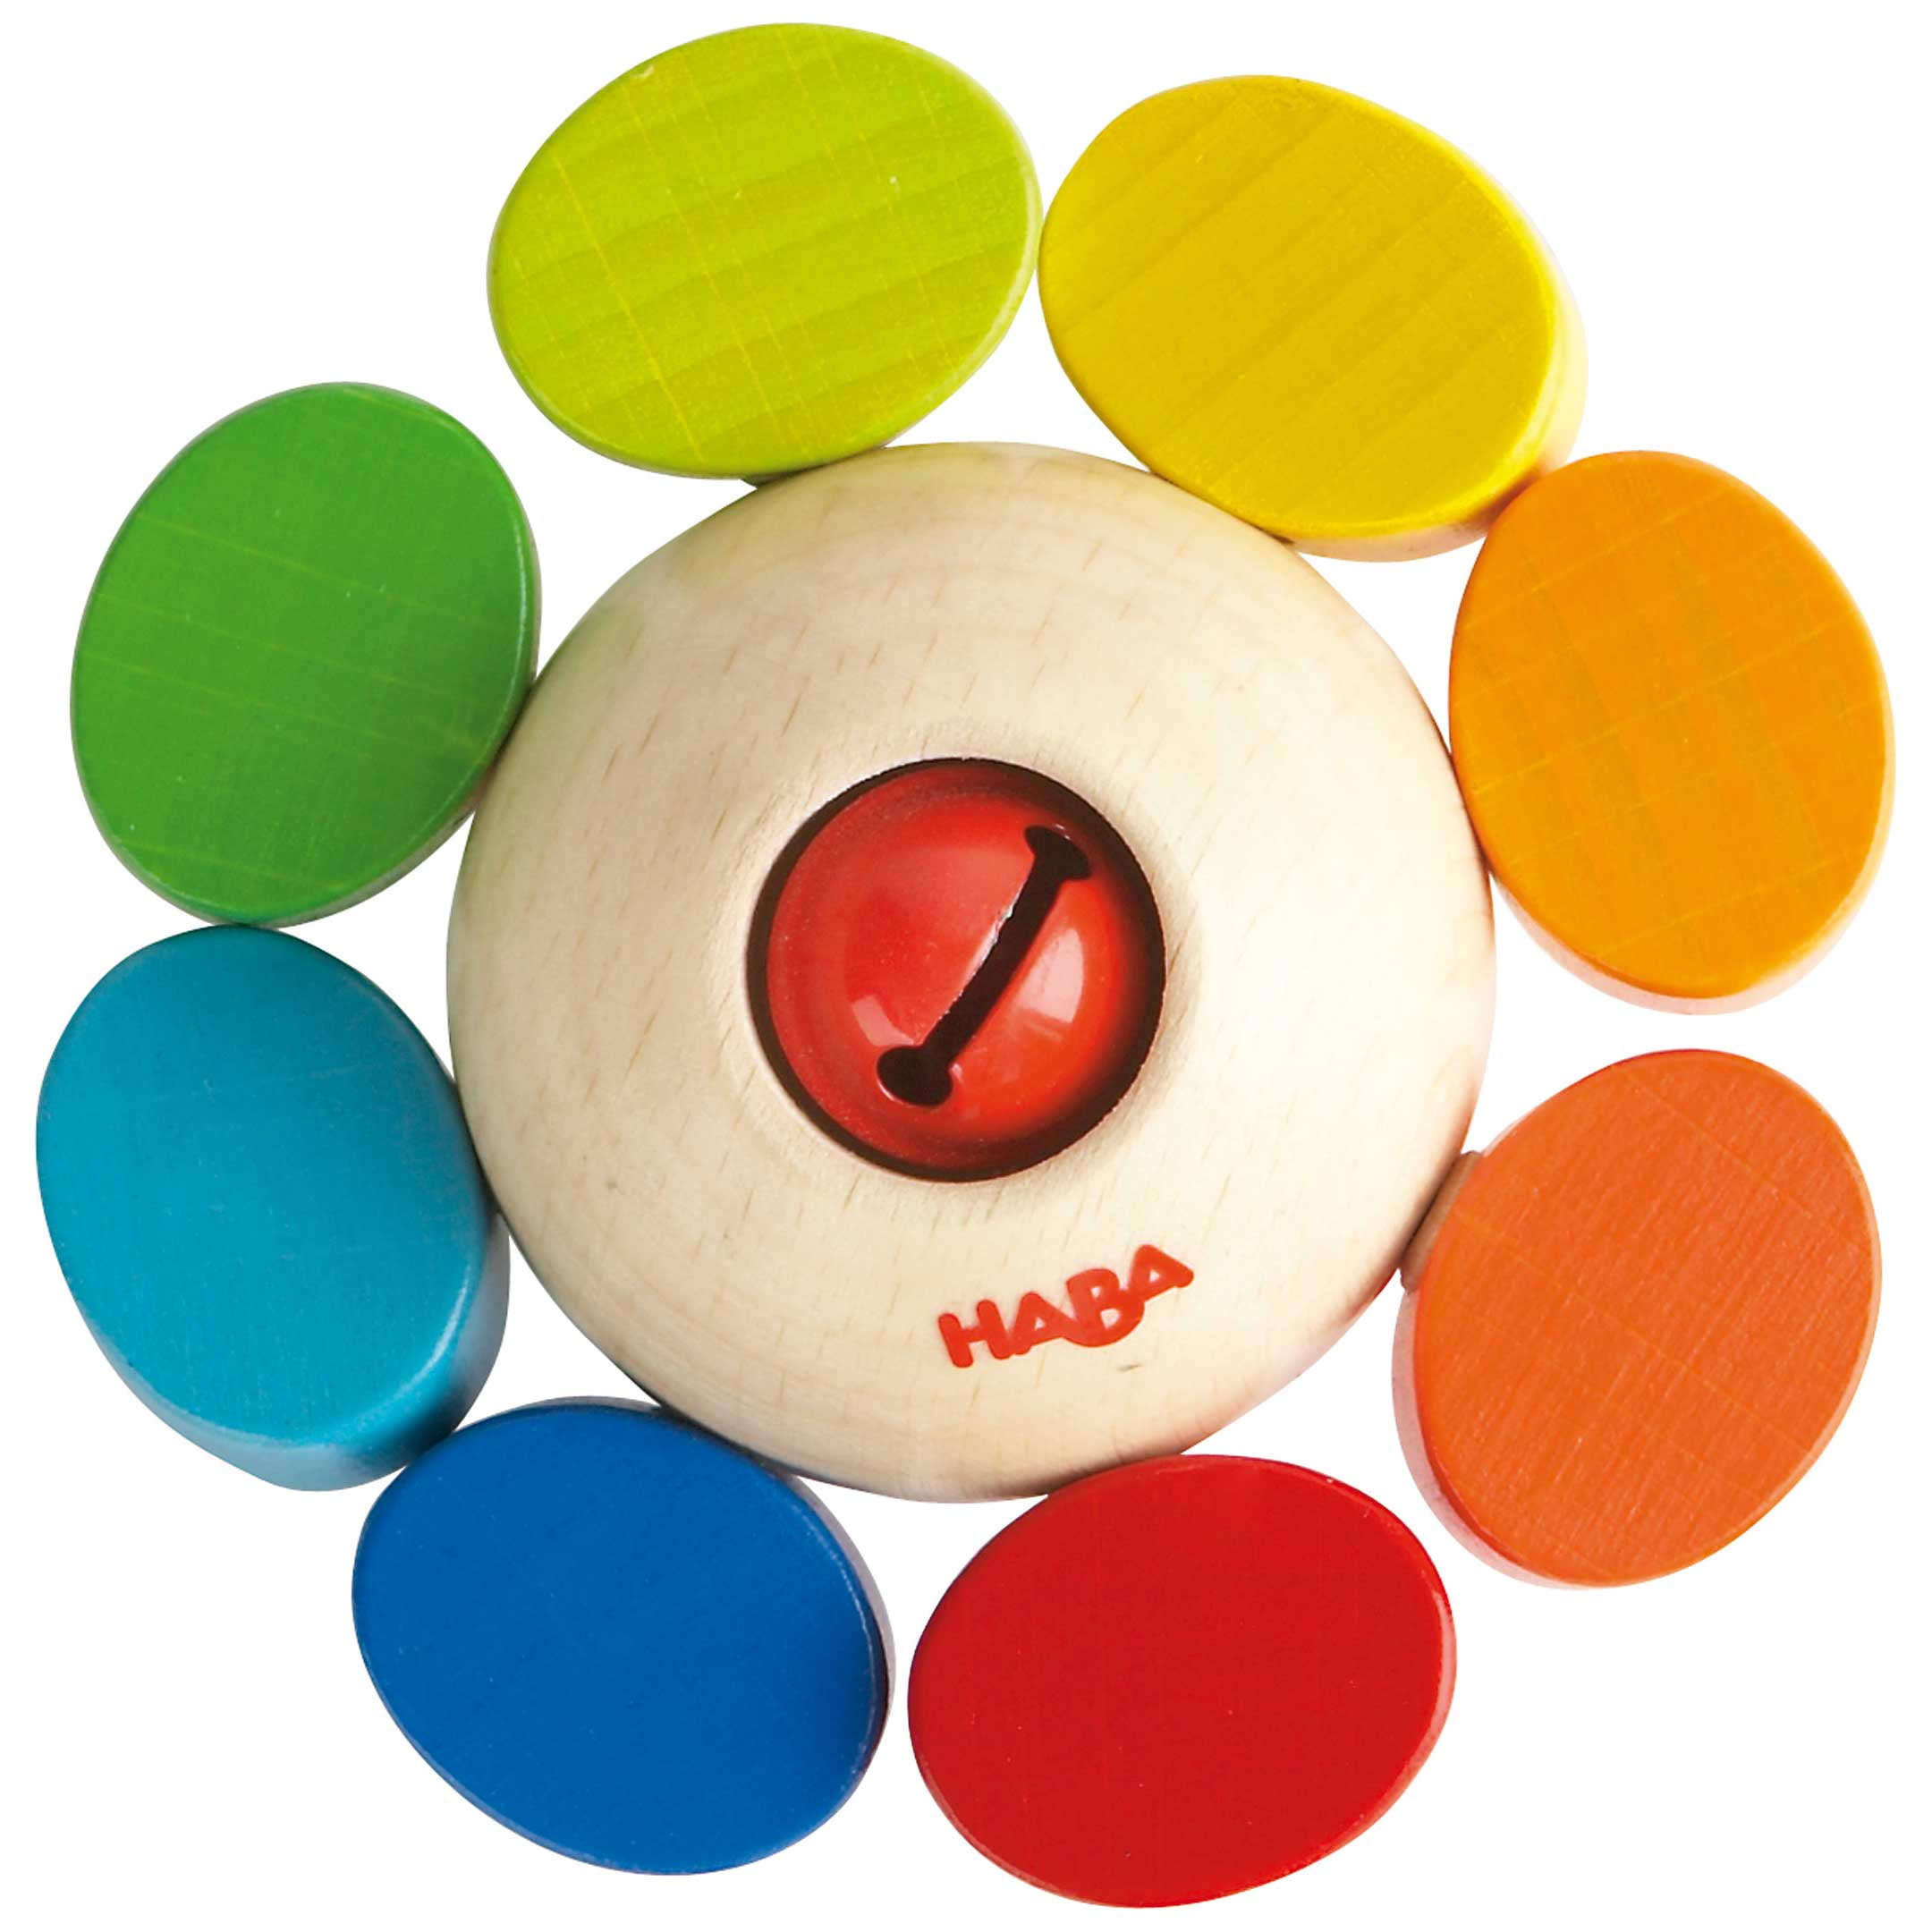 New HABA Jingle Train Wooden Baby Teething Ring Germany bell clutching toy 